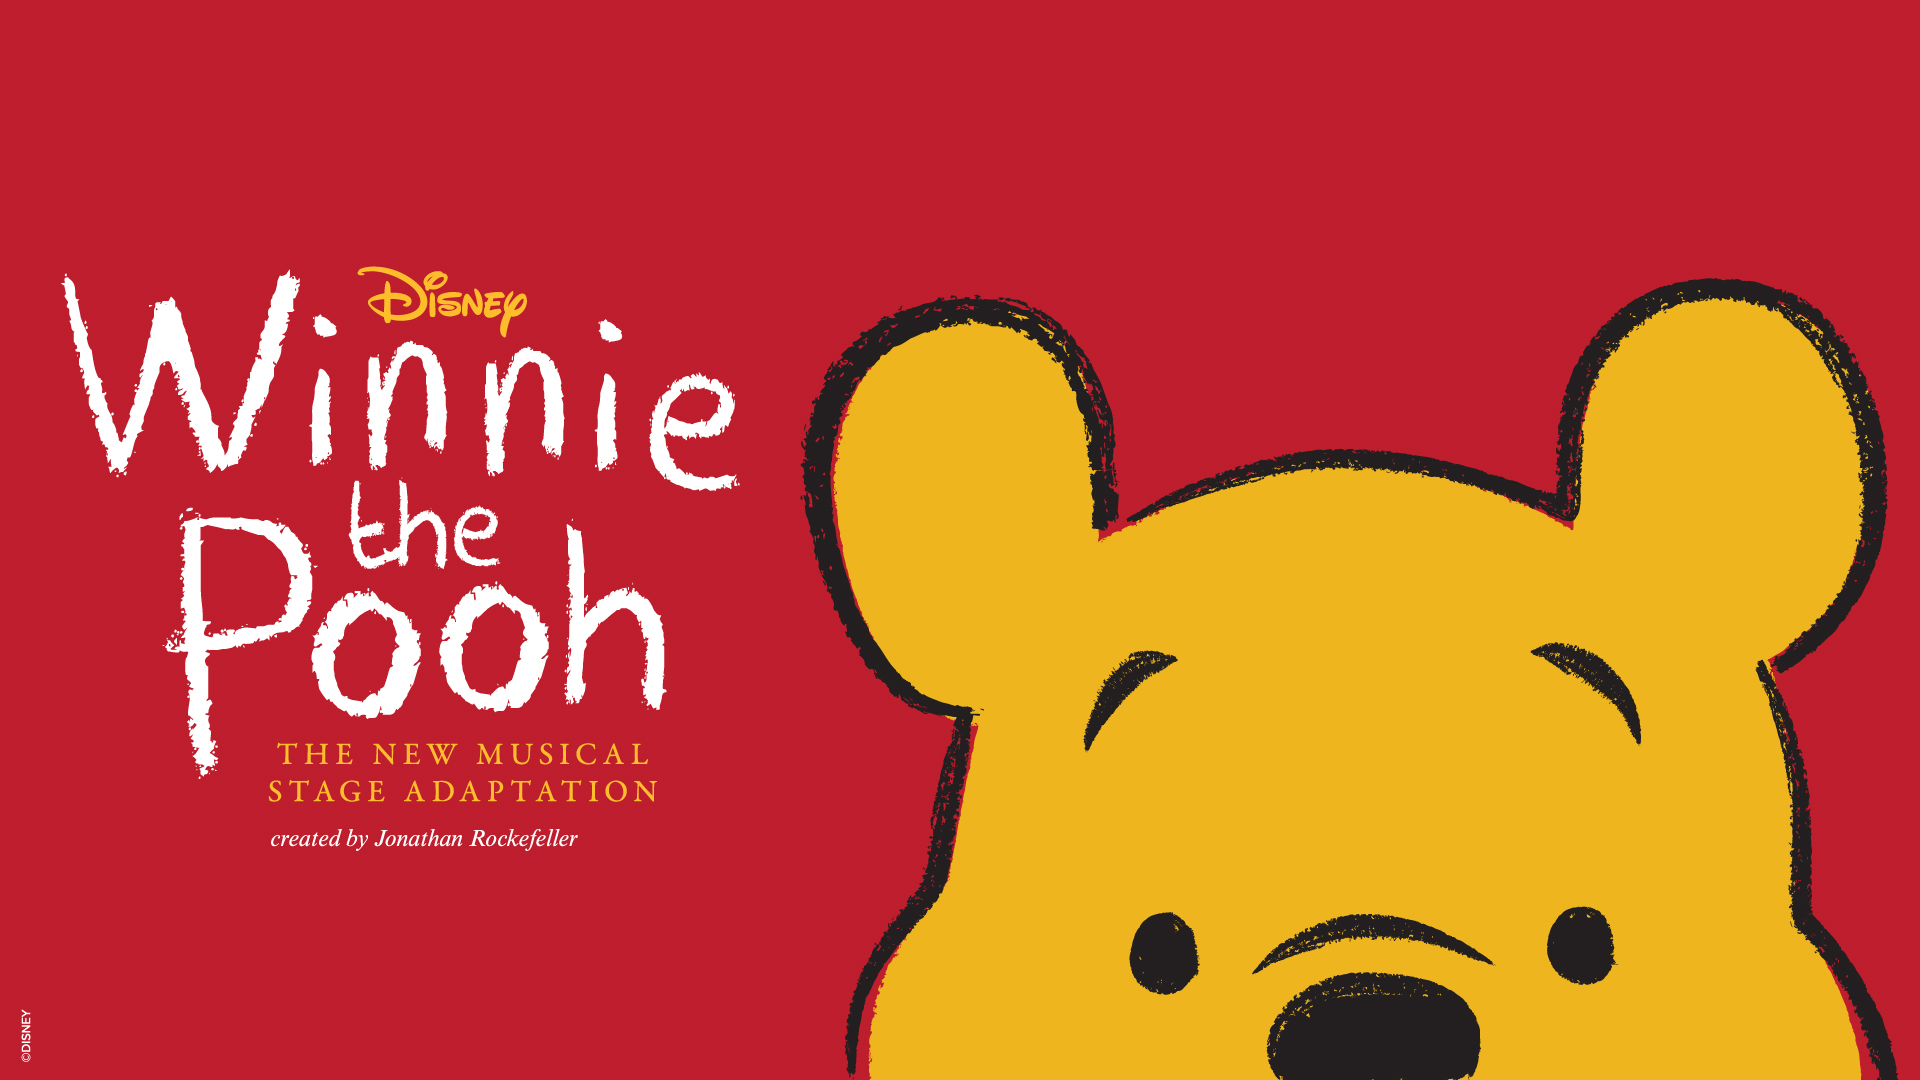 Disney's Winnie the Pooh Is Debuting Its Musical Adaptation Off-Broadway